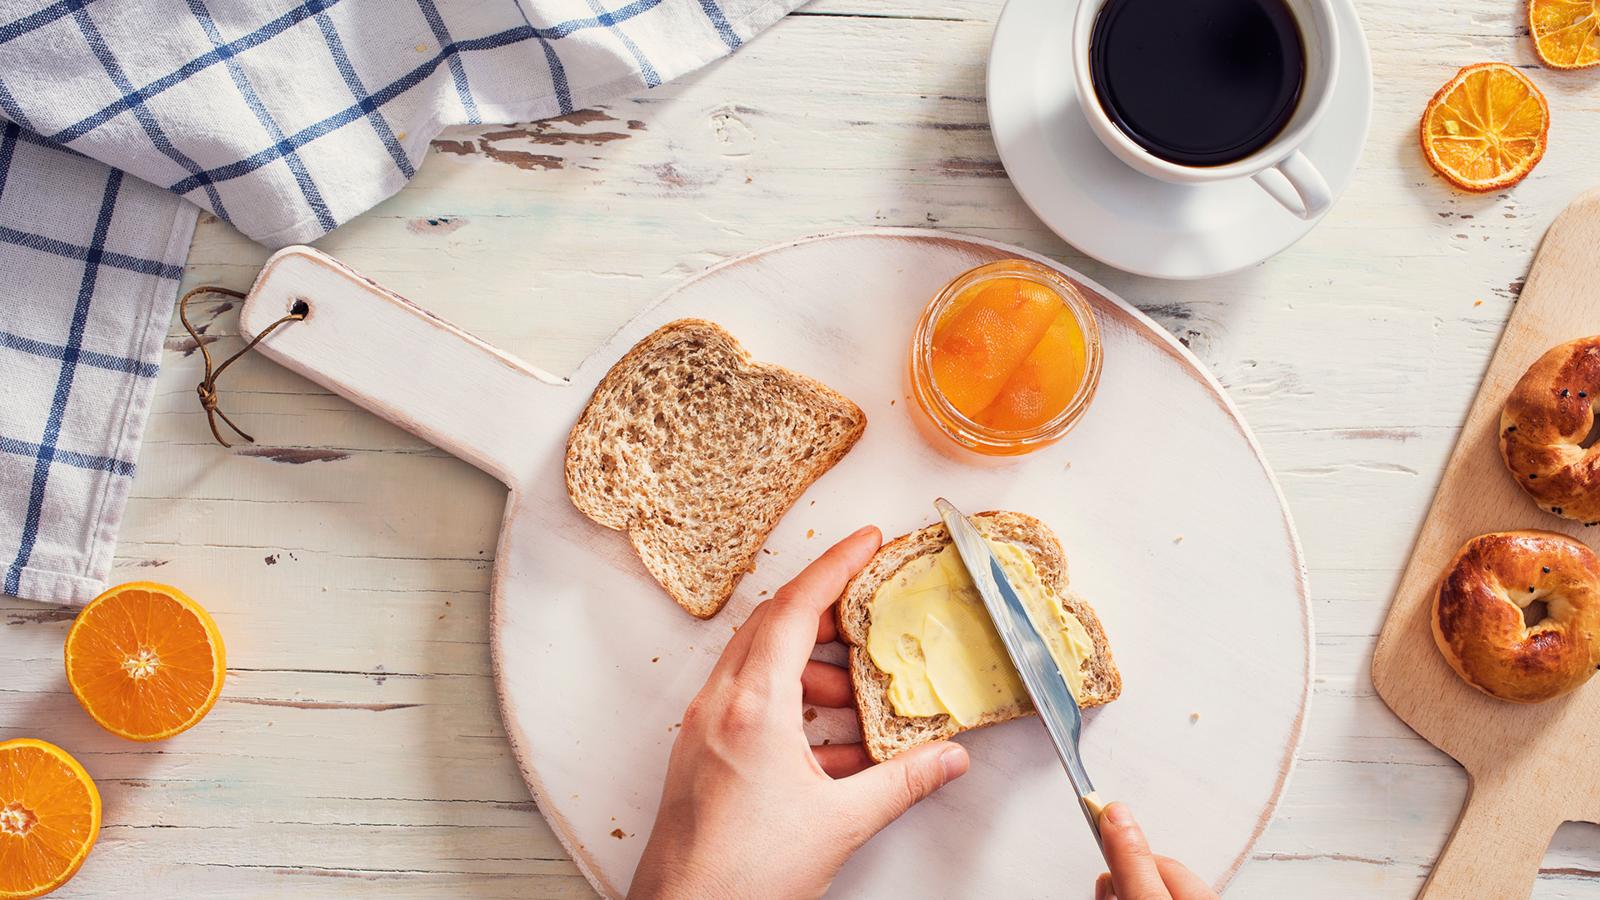 🥯 We’re Pretty Sure We Know Your Birth Month Based on the Breakfast Foods You Choose Bread Spread